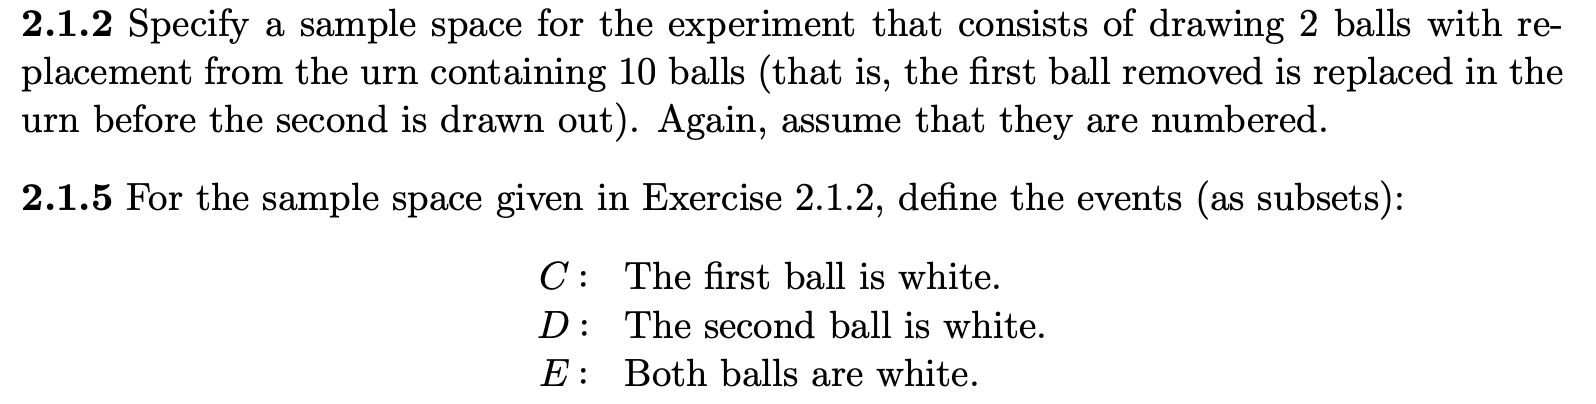 2.1.2 Specify a sample space for the experiment that consists of drawing 2 balls with re-
placement from the urn containing 10 balls (that is, the first ball removed is replaced in the
urn before the second is drawn out). Again, assume that they are numbered.
